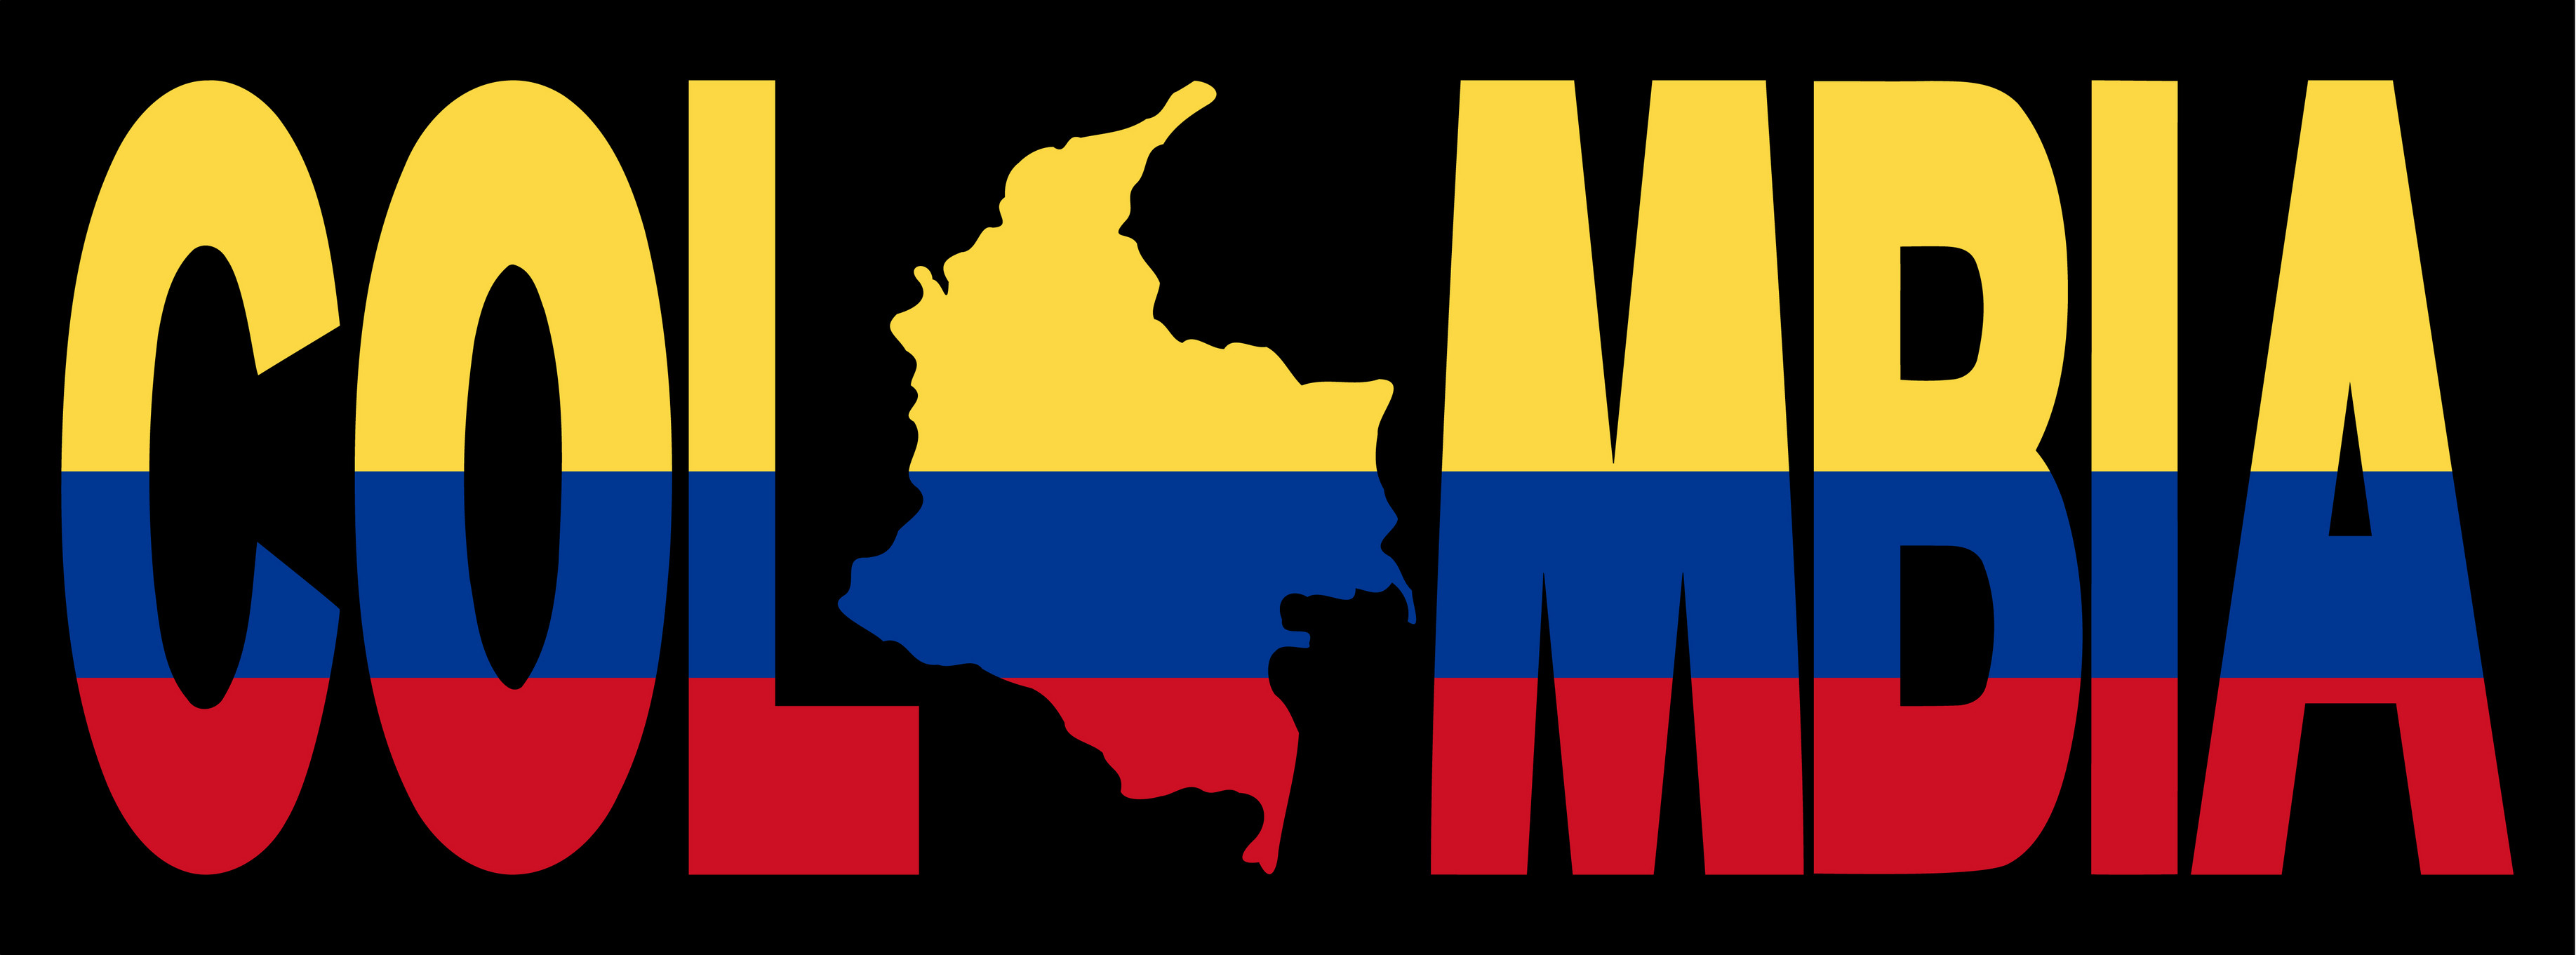 3671x1361 Colombia images Colombia HD wallpaper and background photos